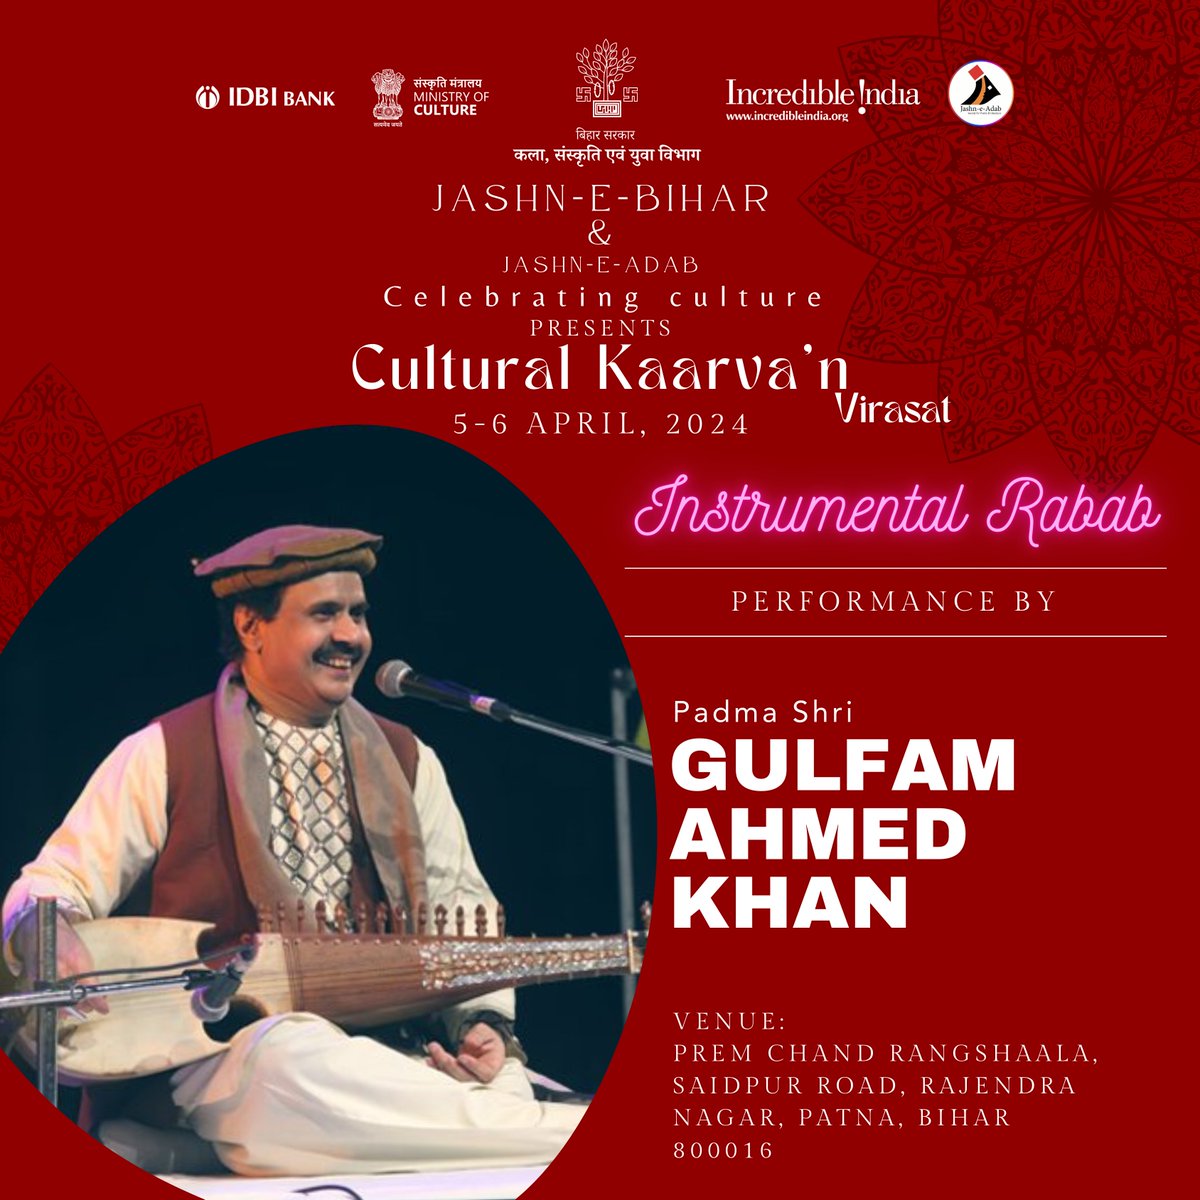 Cultural Caravan under Jashn-e-Bihar is being organized by the Art, Culture and Youth Department of Bihar in collaboration with Jashn-e-Adab organization at Premchandra Rangshala, Patna. Padmashri Gulfam Ahmed Khan will give performance in today's program.